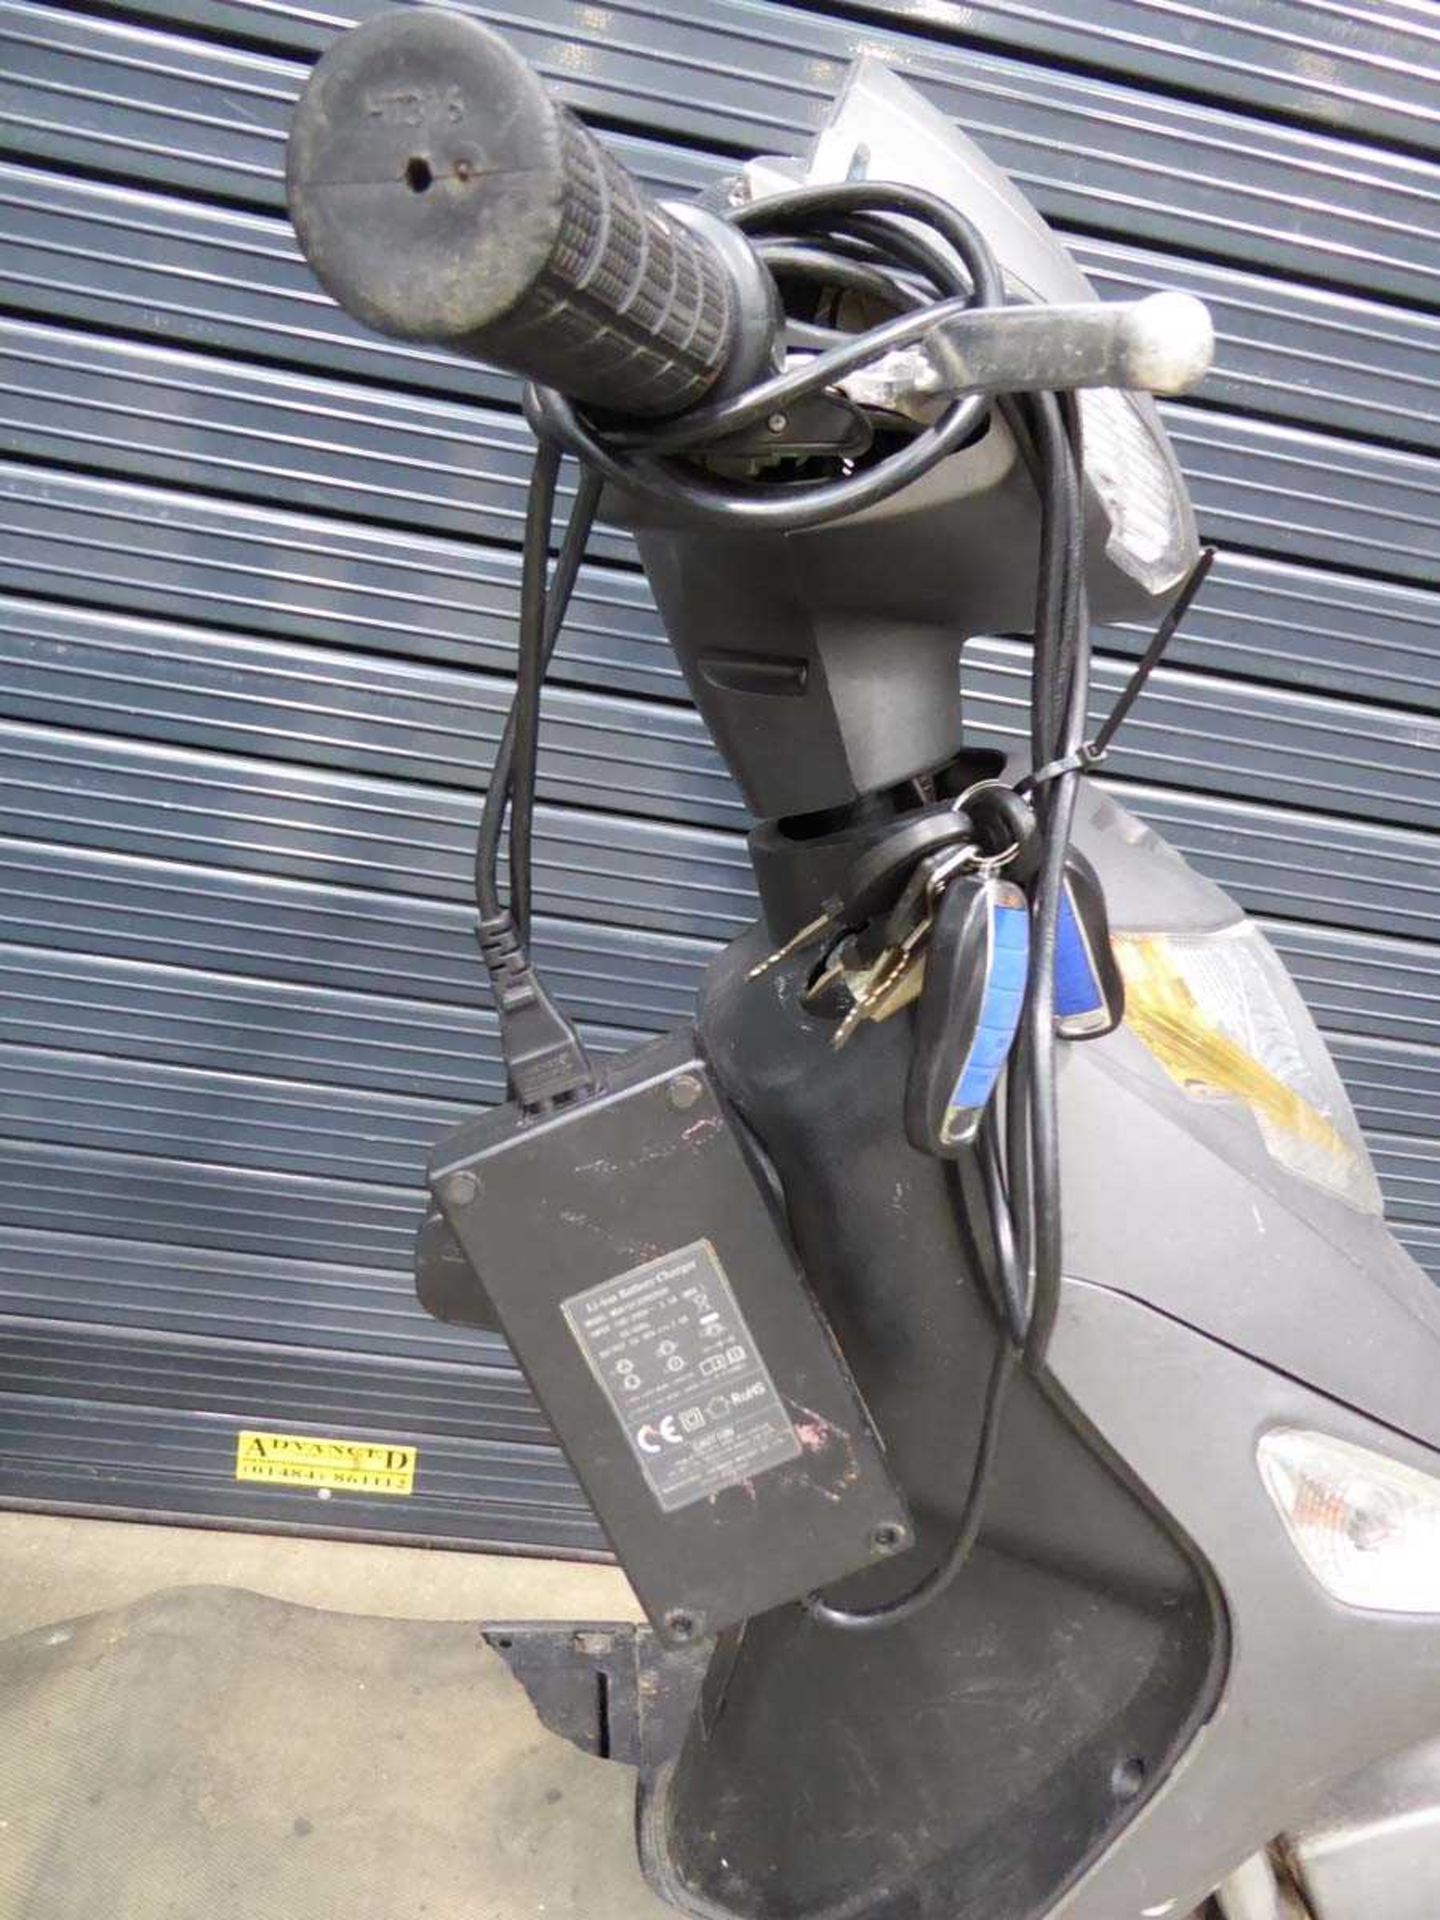 E-Rider electric moped, in need of repair - Image 4 of 5